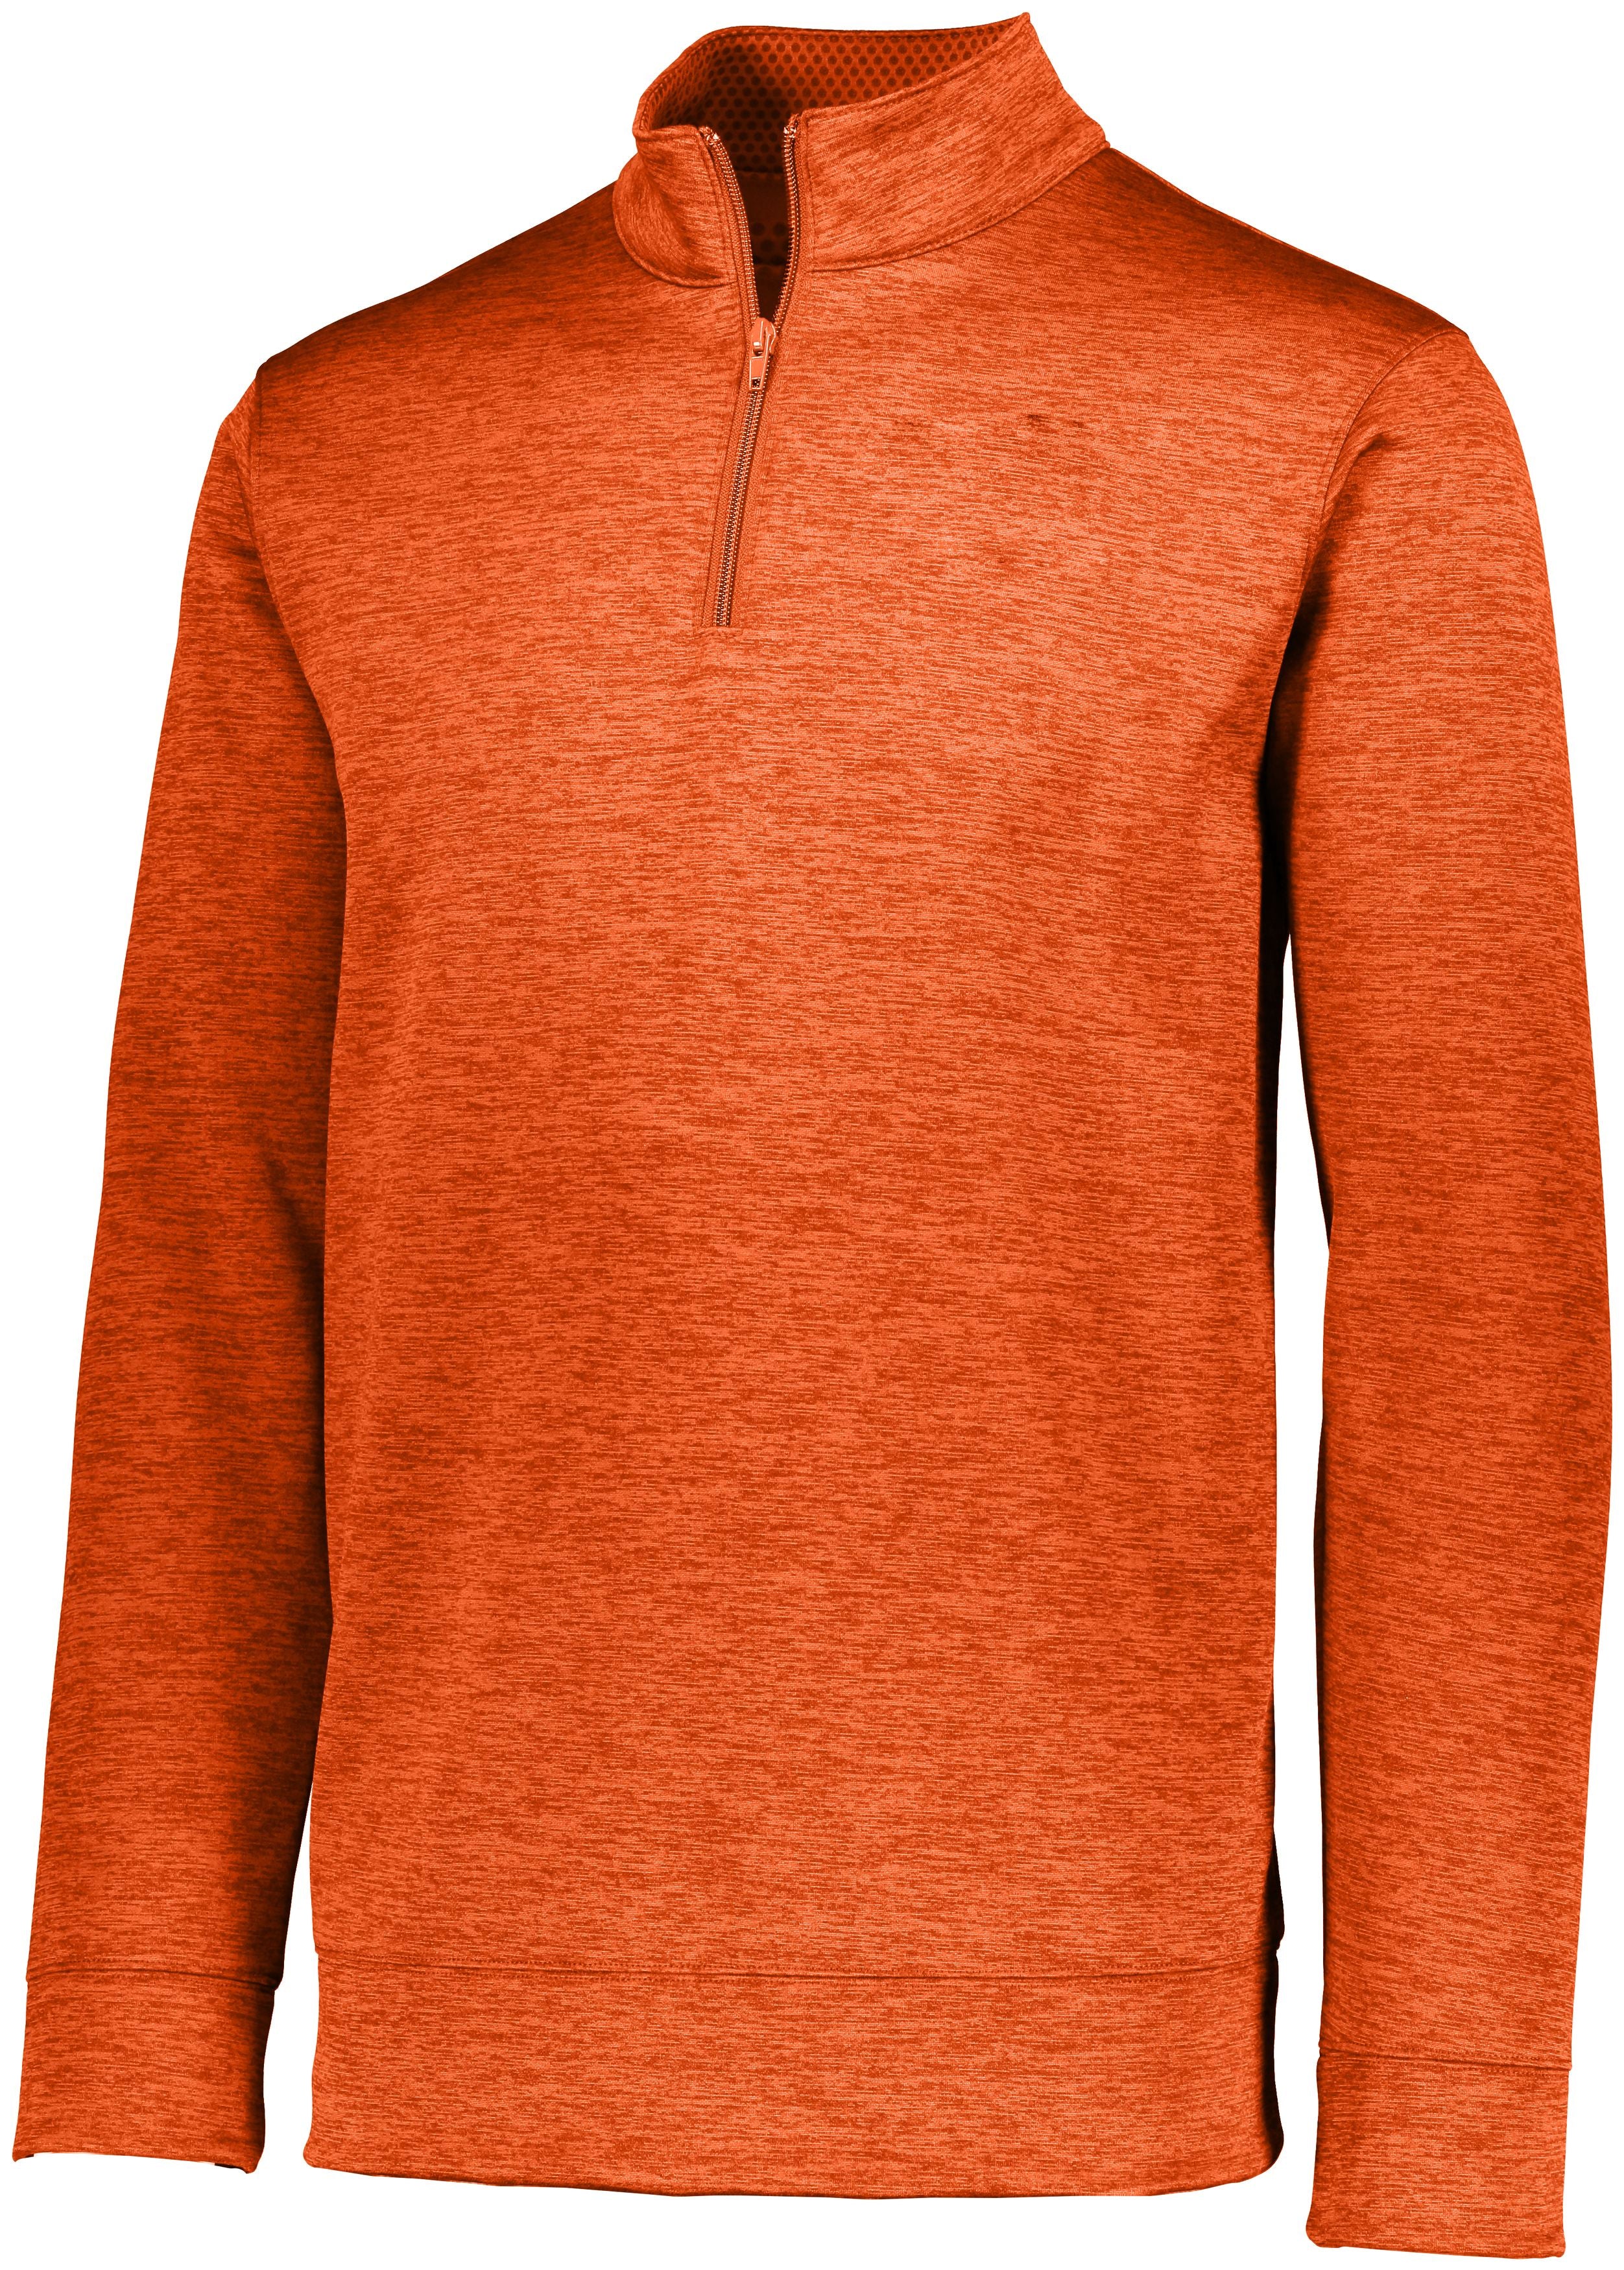 Augusta Sportswear Stoked Tonal Heather Pullover in Orange  -Part of the Adult, Adult-Pullover, Augusta-Products, Outerwear, Tonal-Fleece-Collection product lines at KanaleyCreations.com